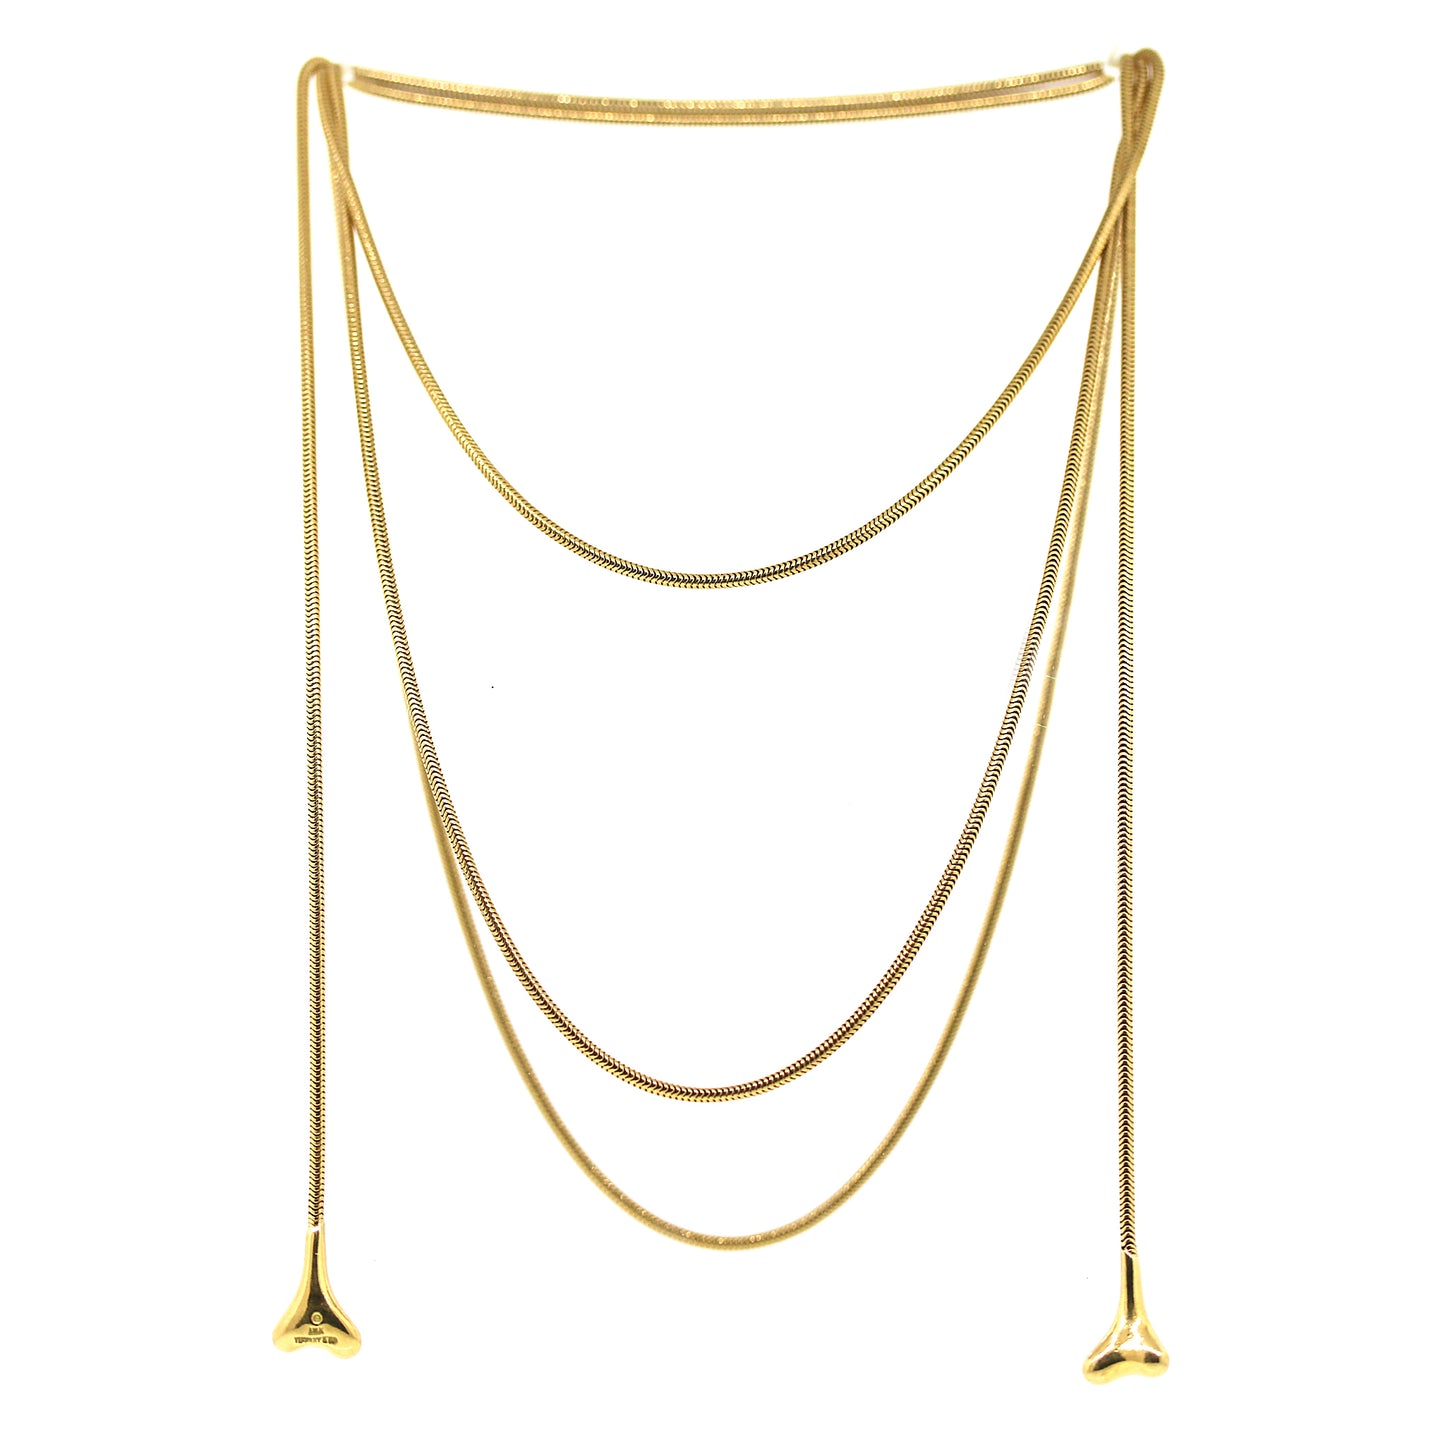 Tiffany and Co. Vintage Bone End Long Lariat Necklace in 18k Yellow Gold